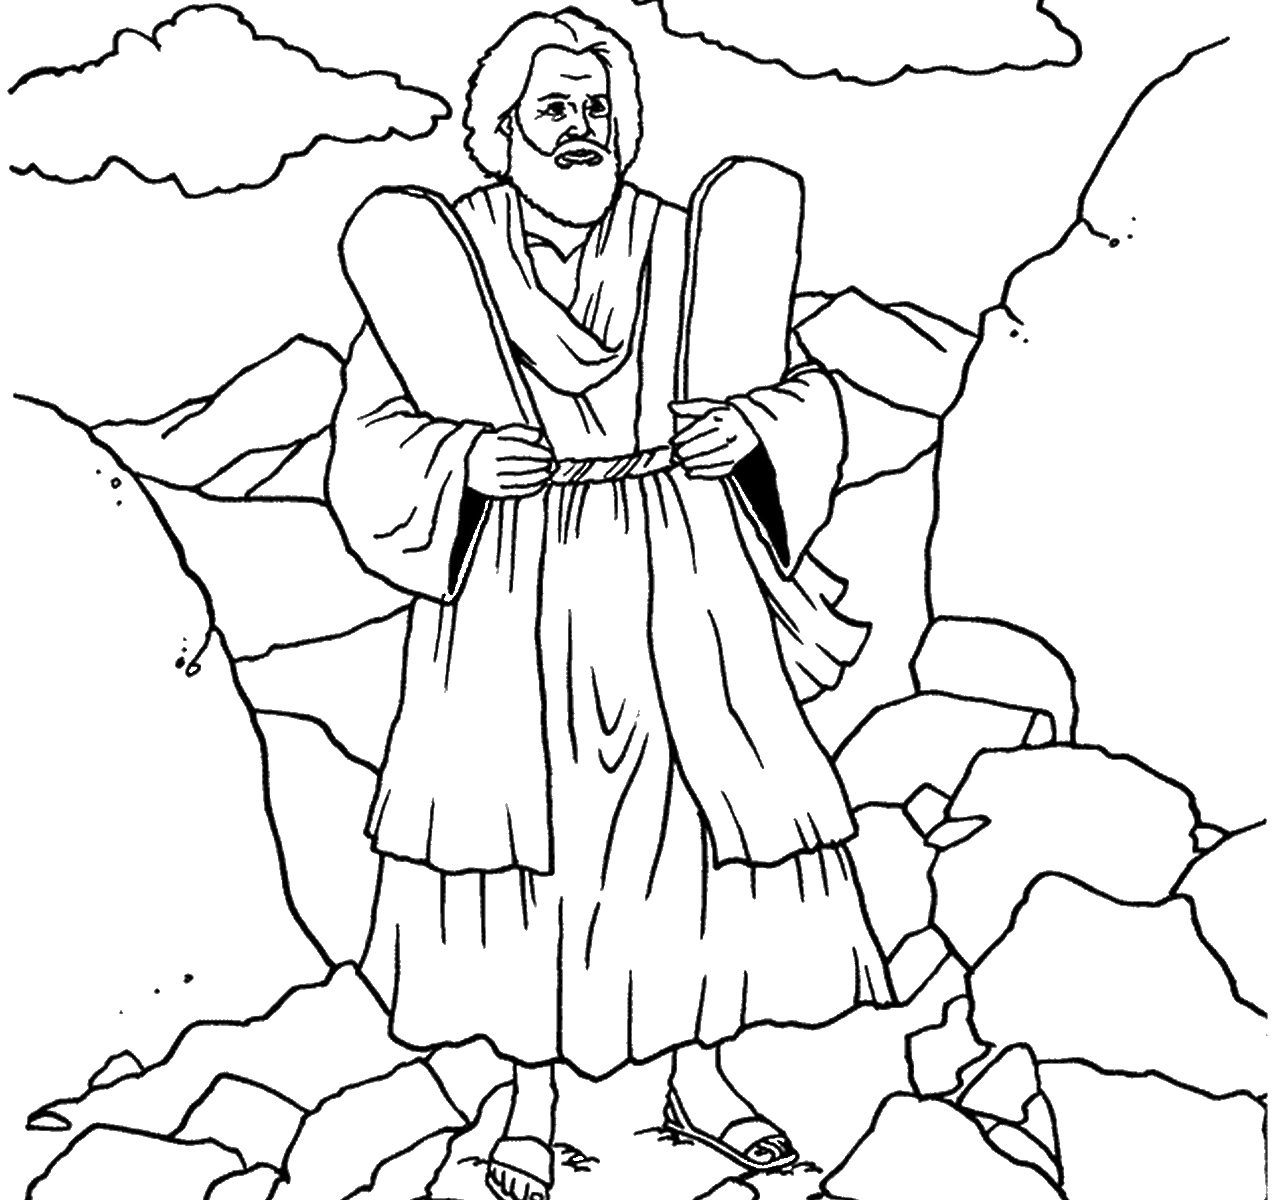 Tens Coloring Sheet Best Of Free Printable Moses Pages Catholic - Free Printable Ten Commandments Coloring Pages